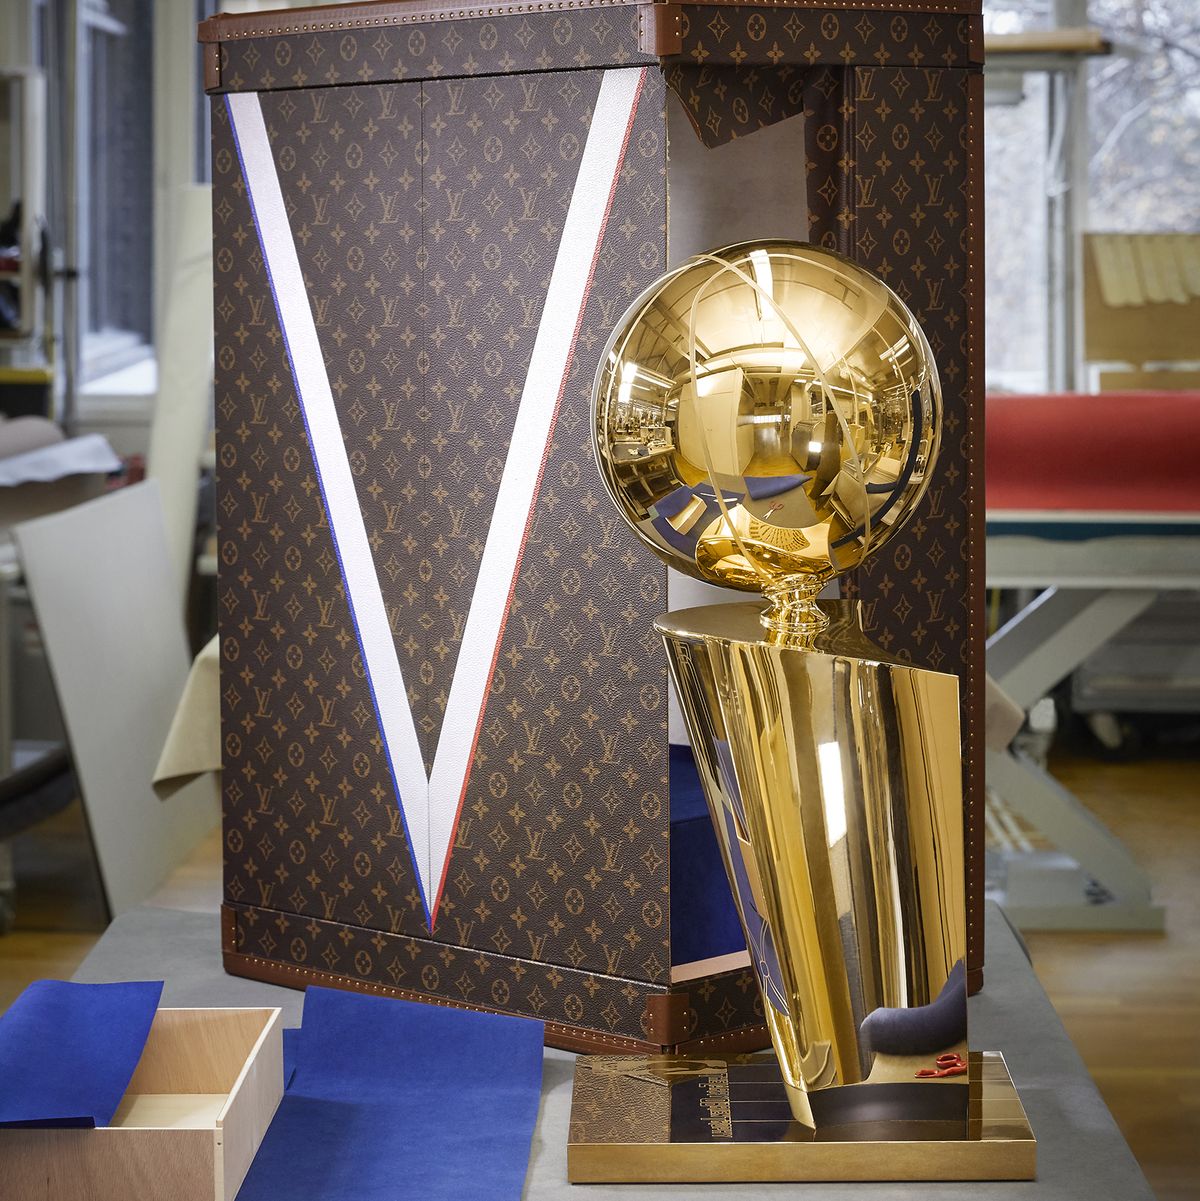 All the items of the Louis Vuitton x NBA capsule collection